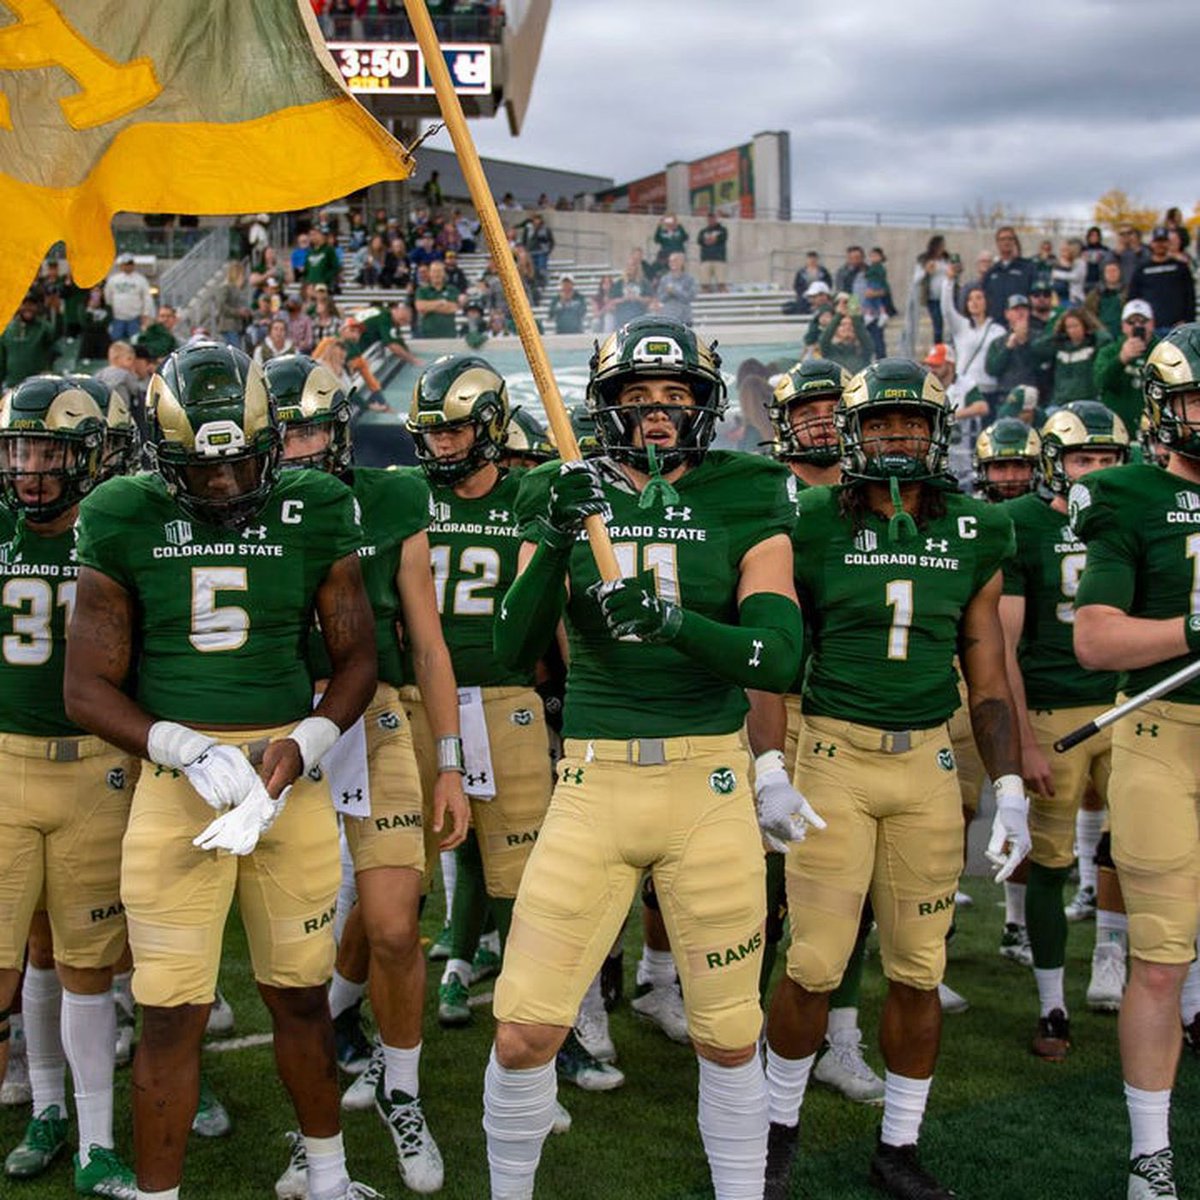 First off I want to thank my Heavenly Father, my family, coaches, and teammates. After a great conversation and practice with @CoachChuka I am so grateful to say I have received an offer at THE Colorado State!! @ColoradoStateU @CoachAAle @WestlakeFootbal @SKekuaokalani